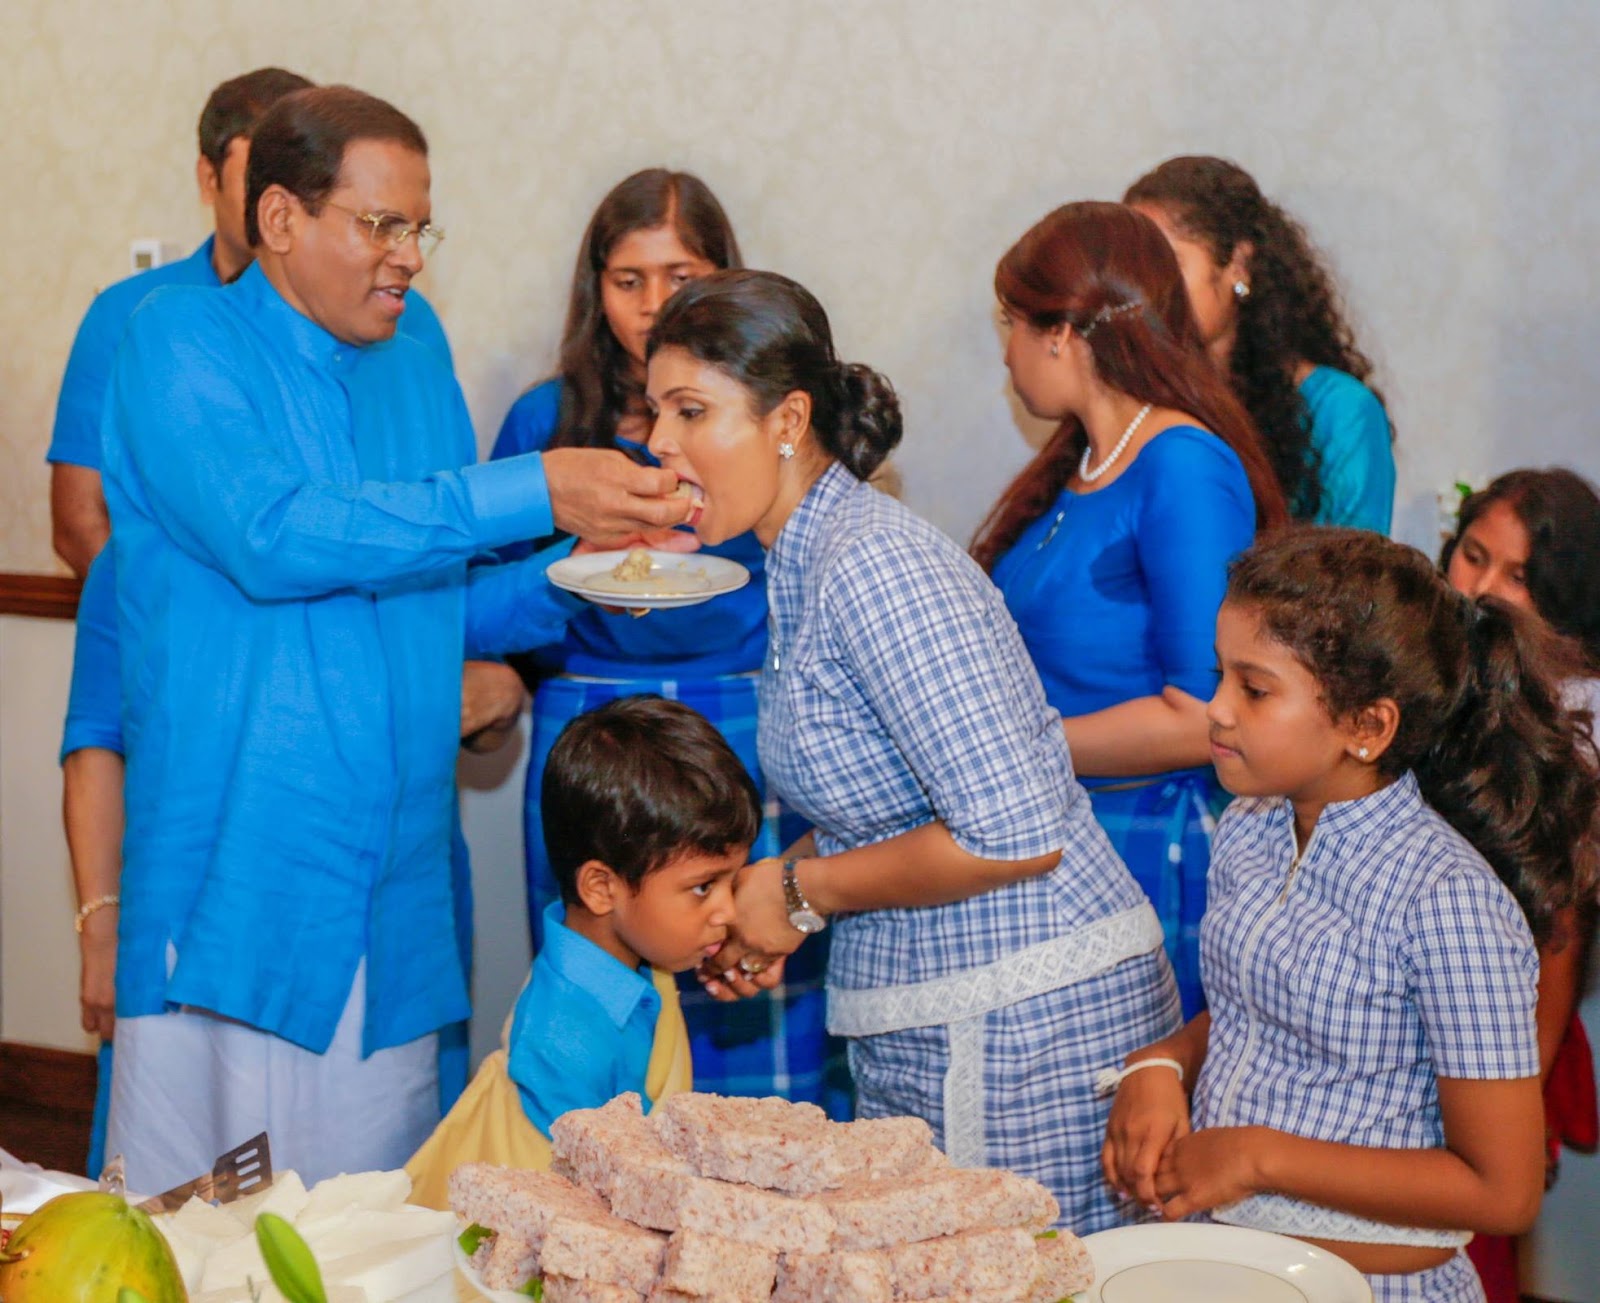 President Commemorates Avurudu Auspicious Hours With Both Daughters And